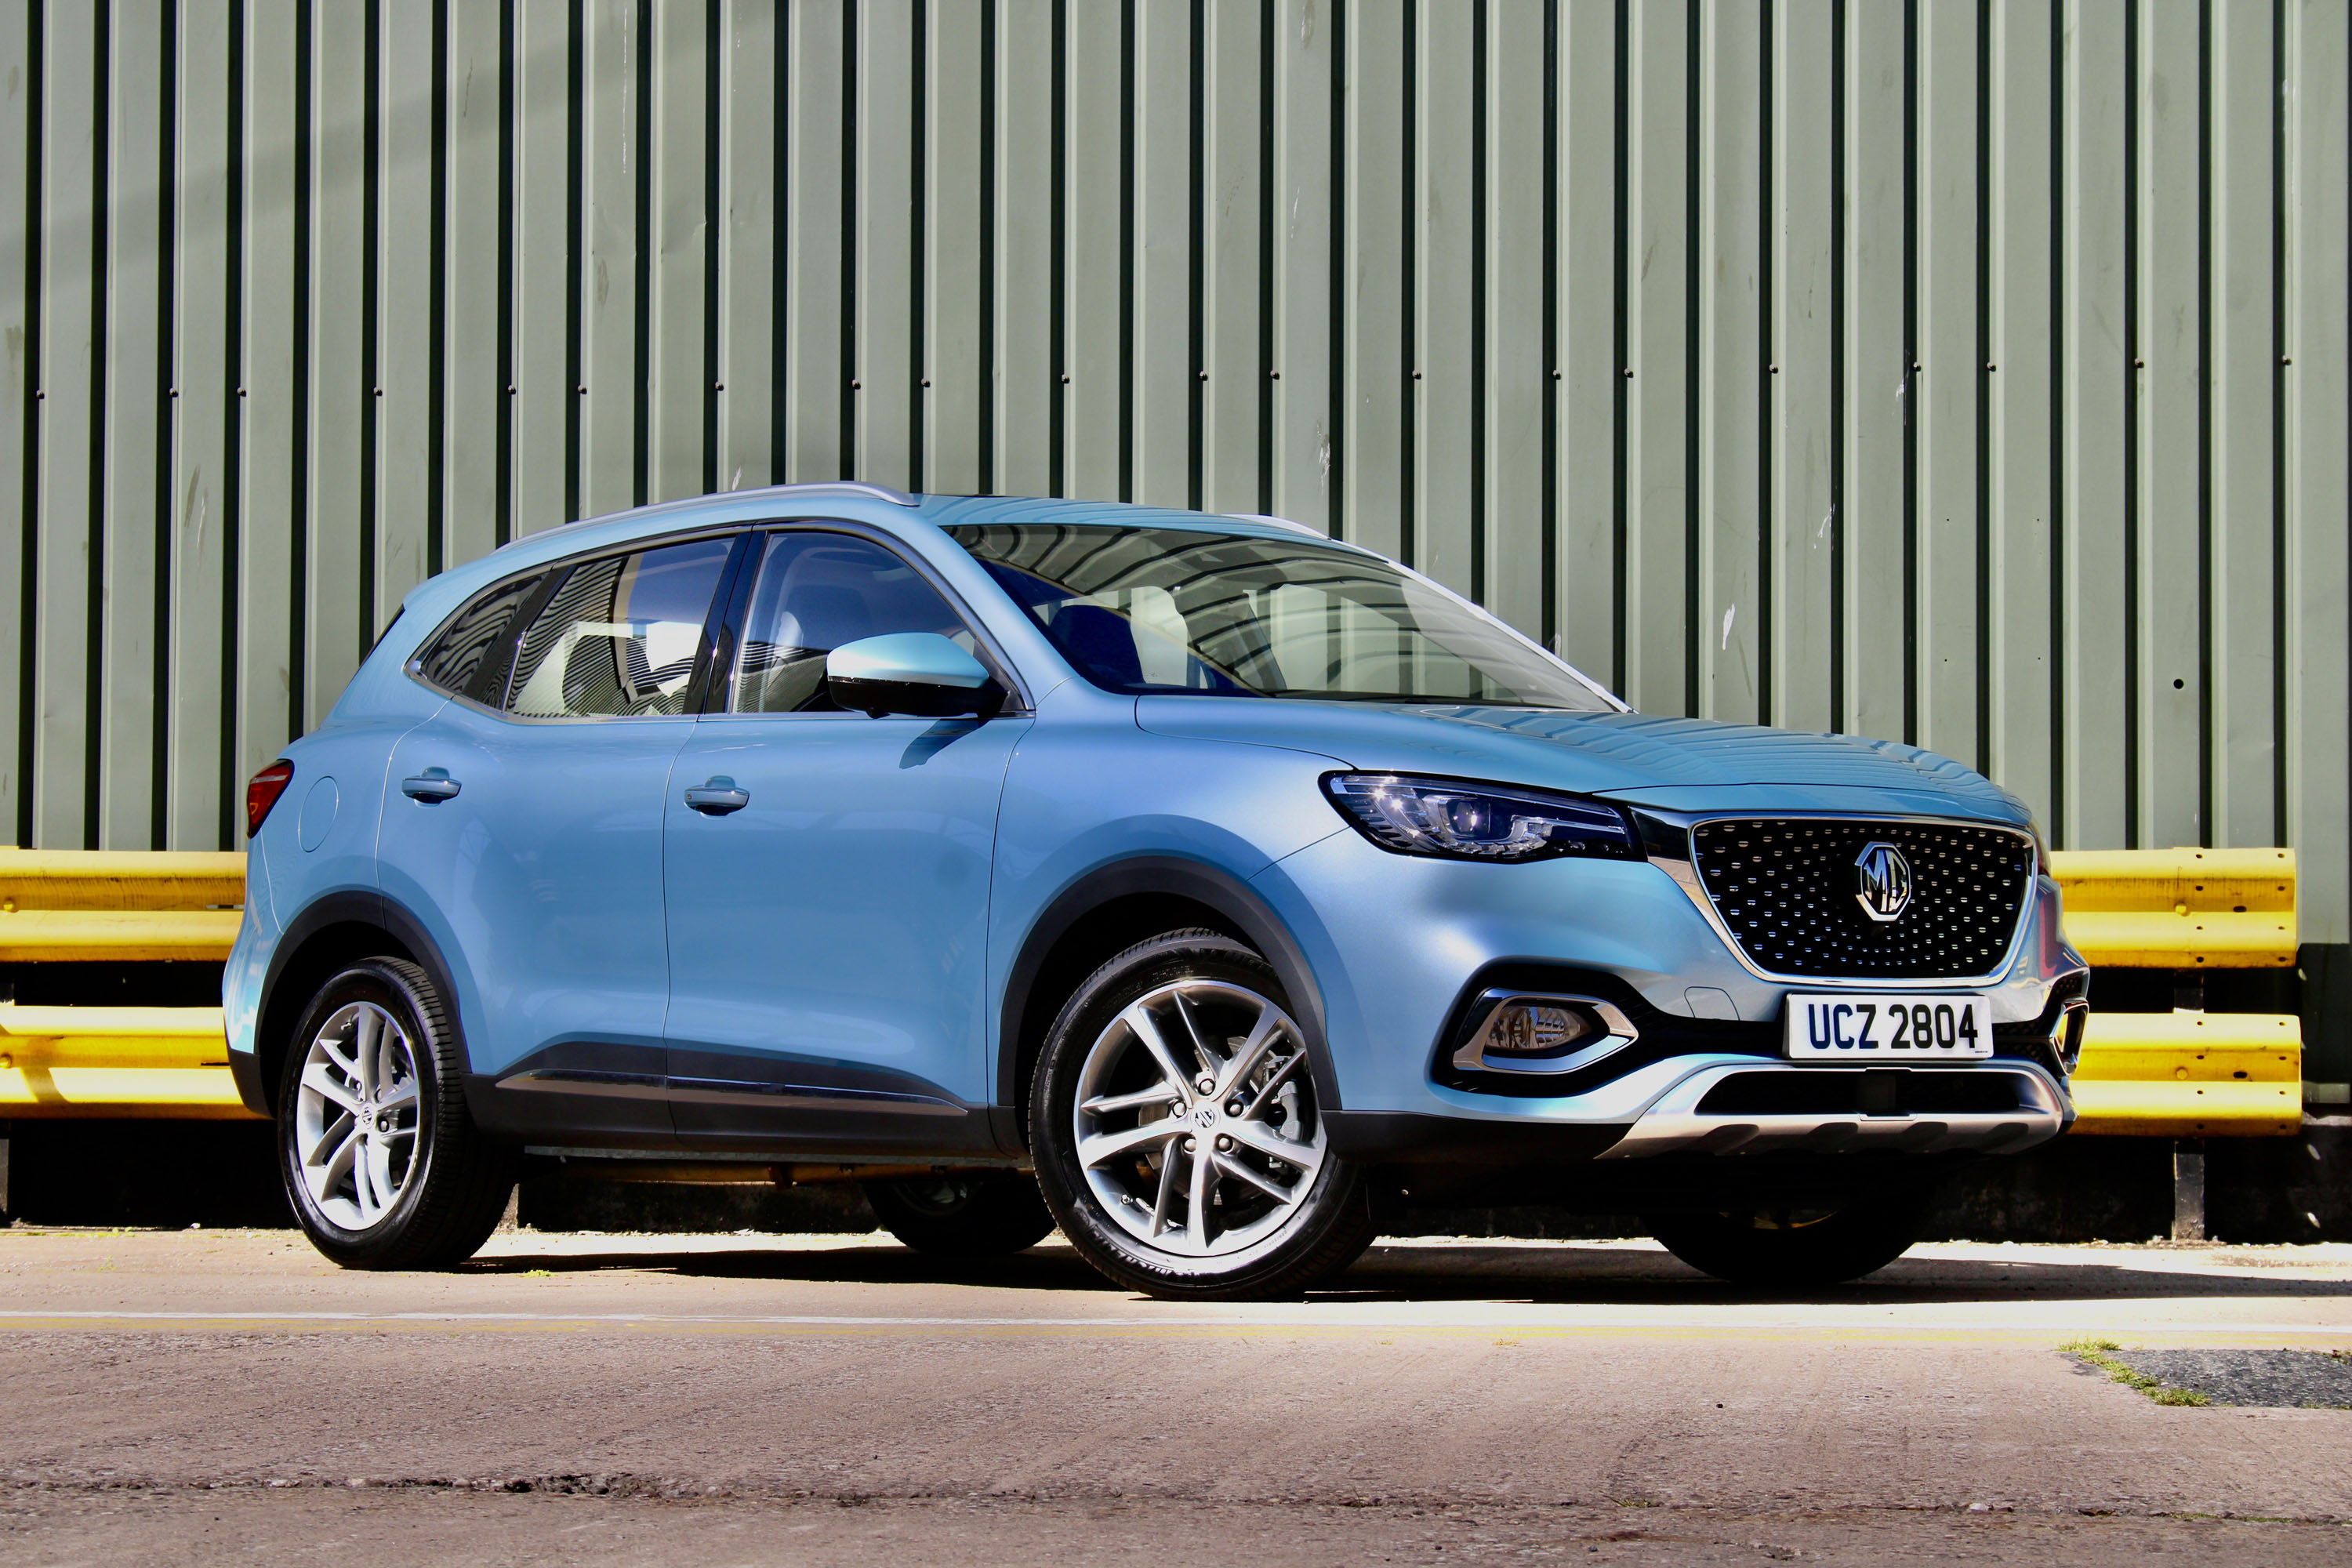 MG LAUNCHES PLUG-IN HYBRID HS SUV